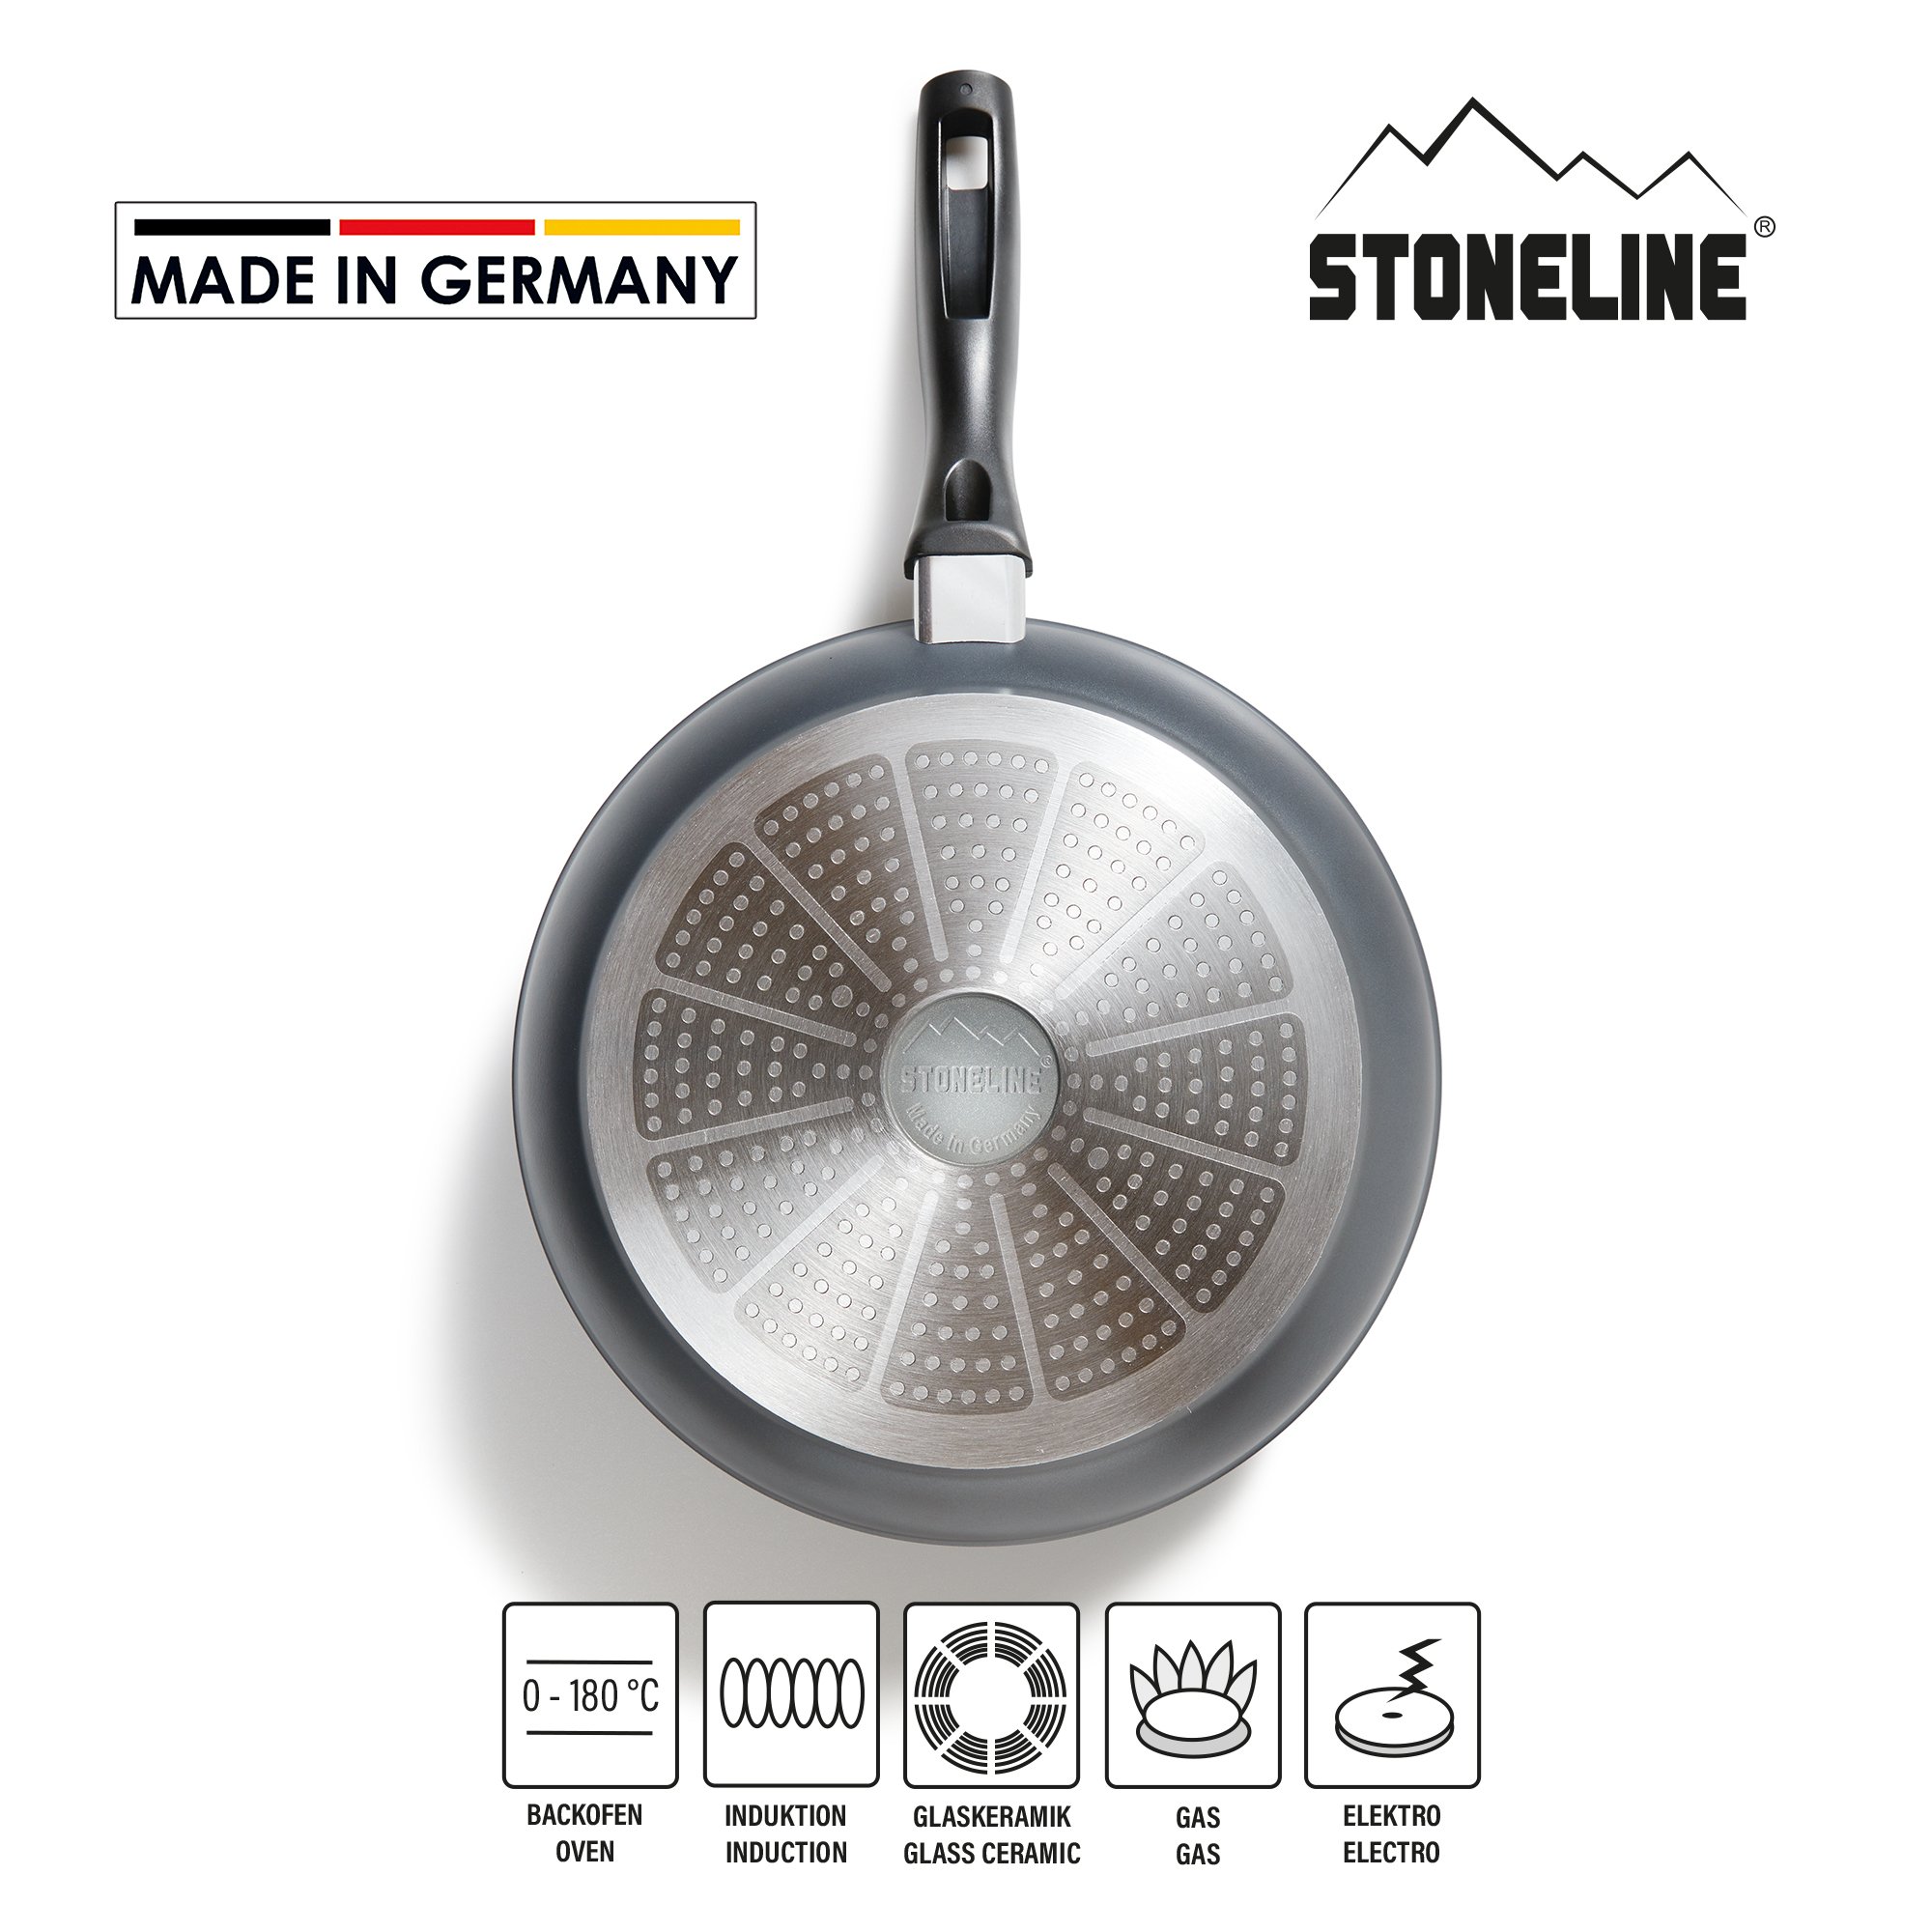 STONELINE® Frying Pan 28 cm, Large Non-Stick Pan | Made in Germany | CLASSIC